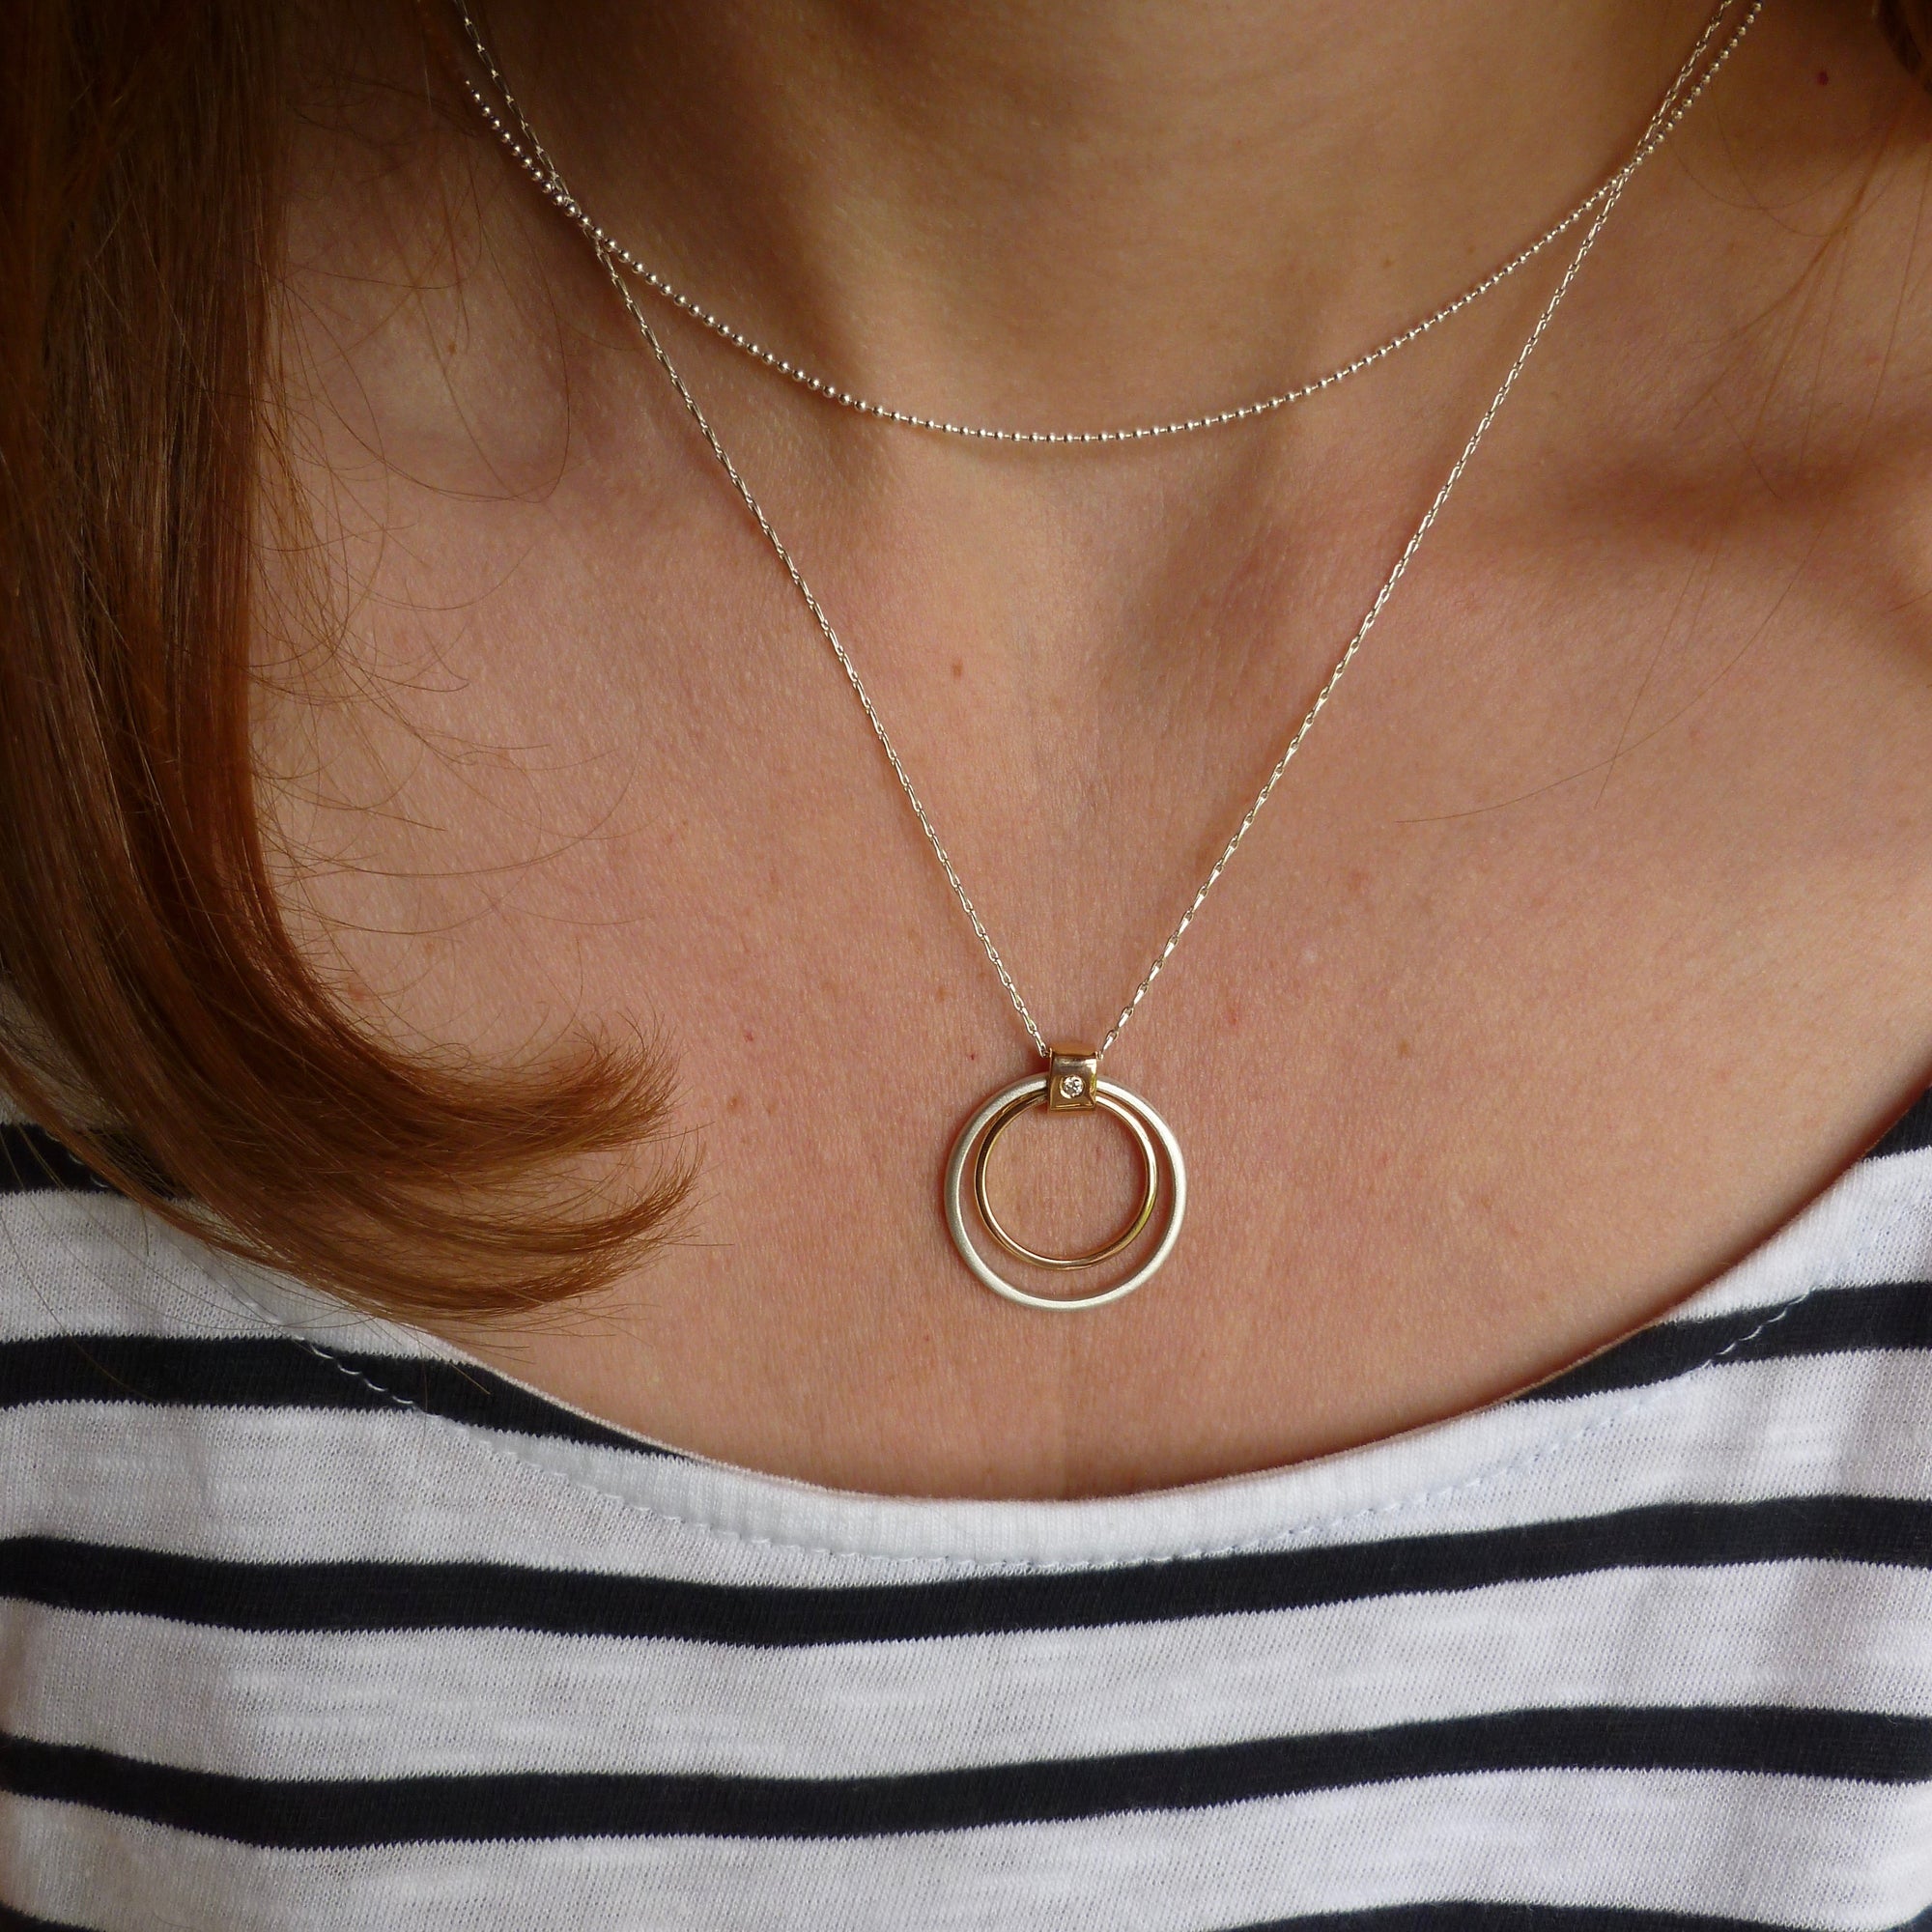  Contemporary unique bespoke handmade. Sterling silver and 18ct rose gold pendant.